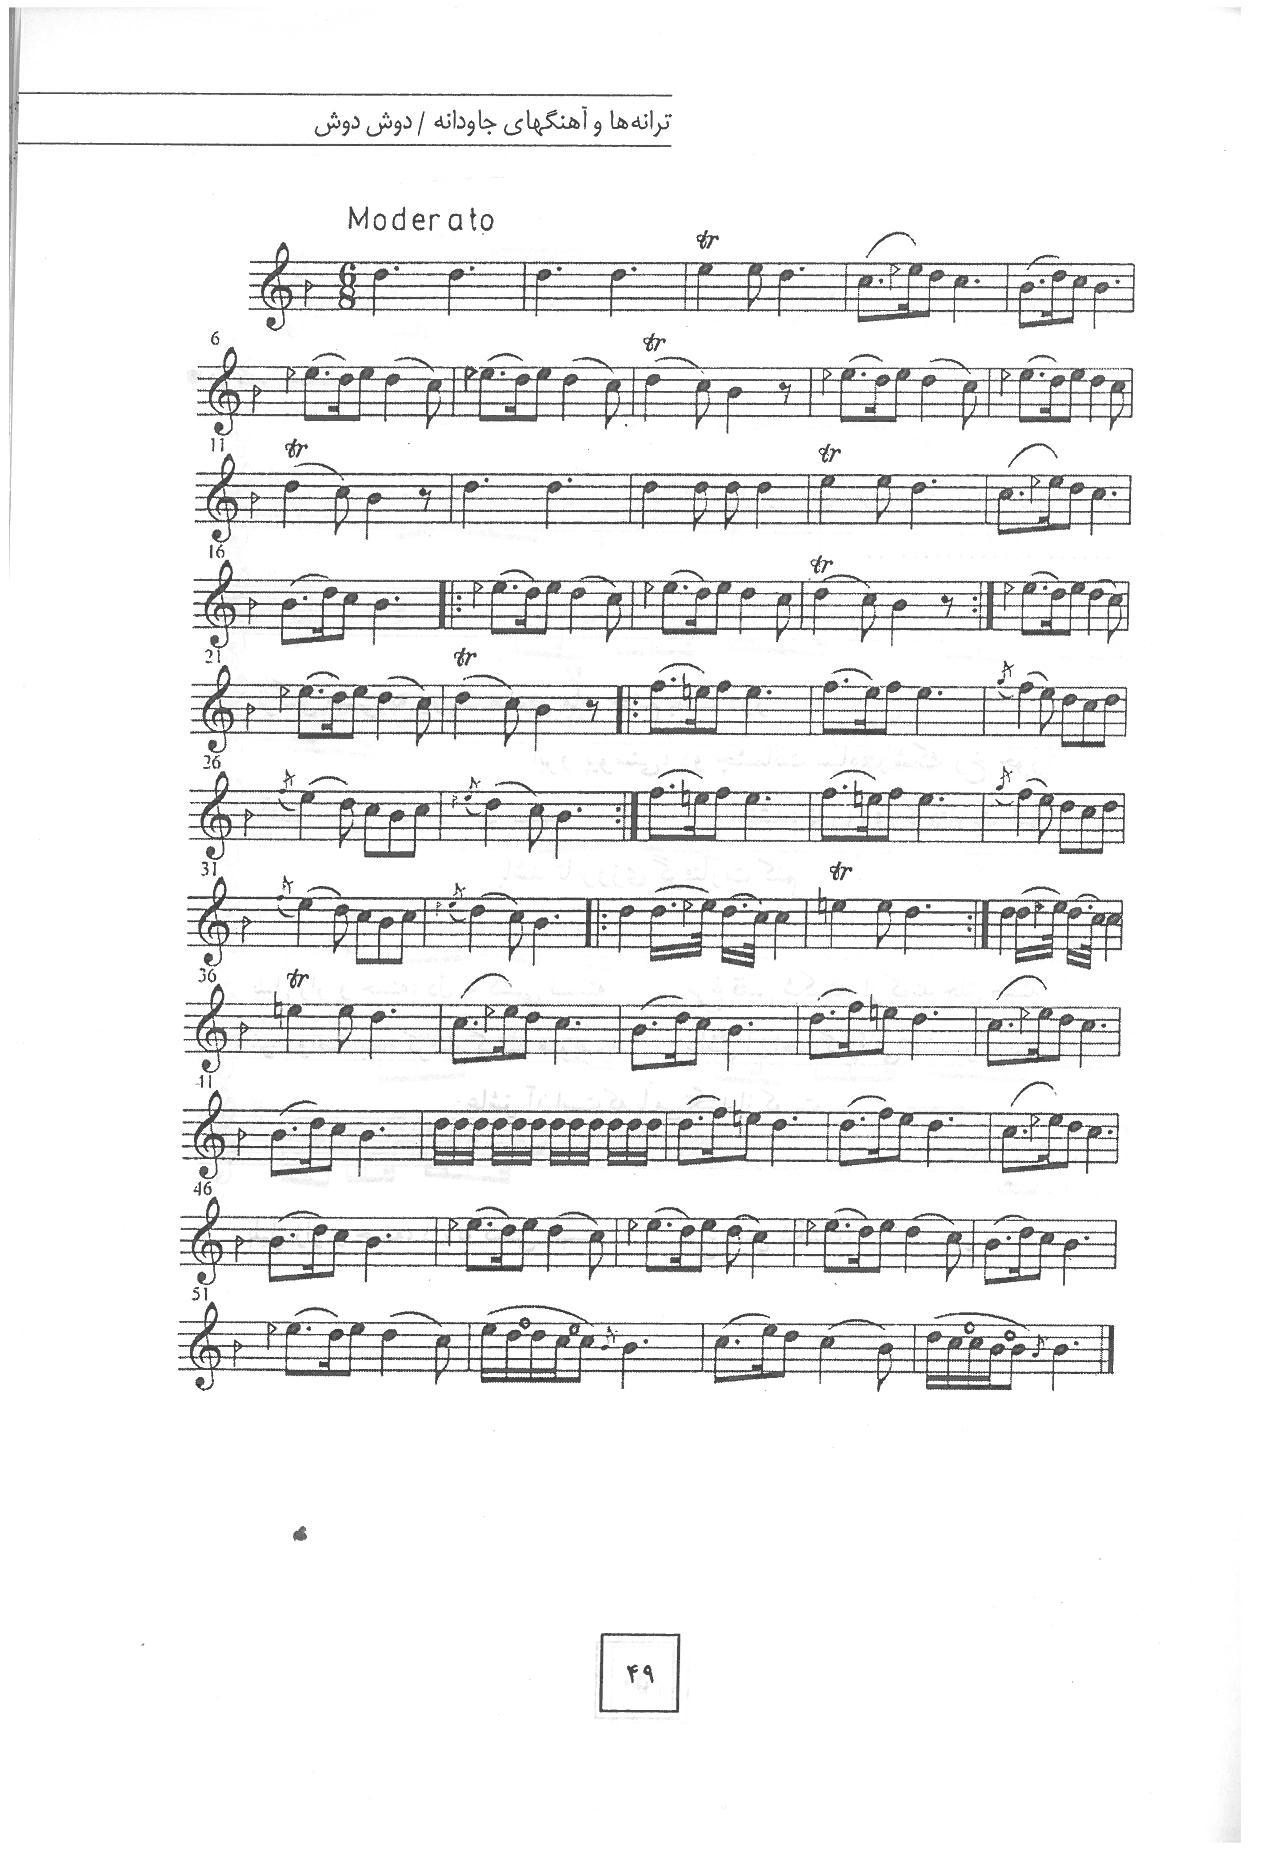 A sheet music page with many notes on it.